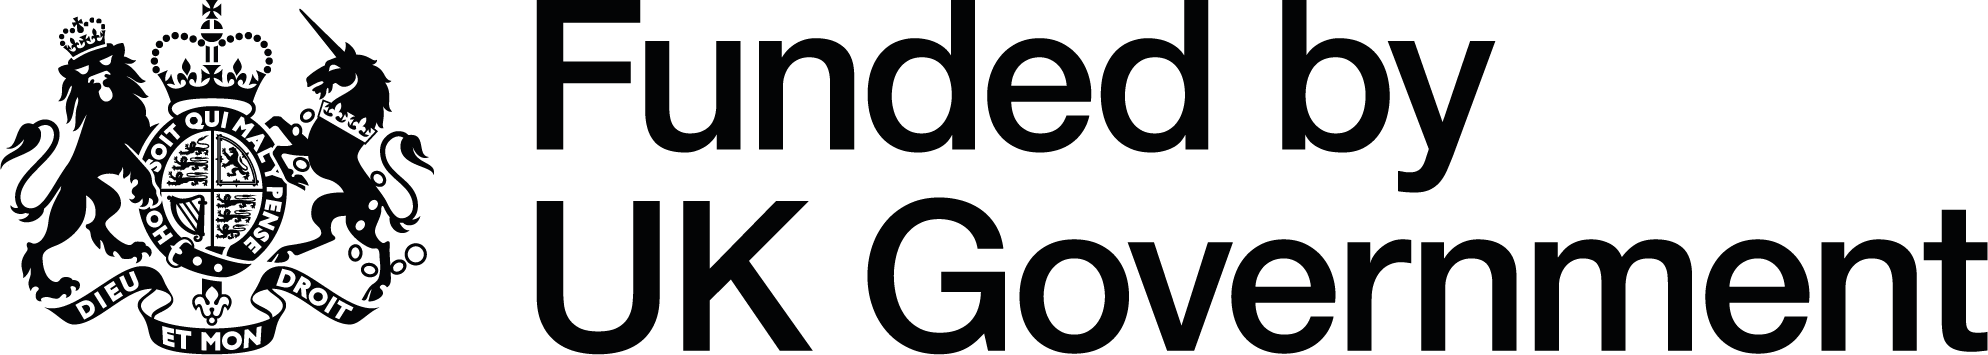 Logo with coat of arms and the words Funded by UK Government